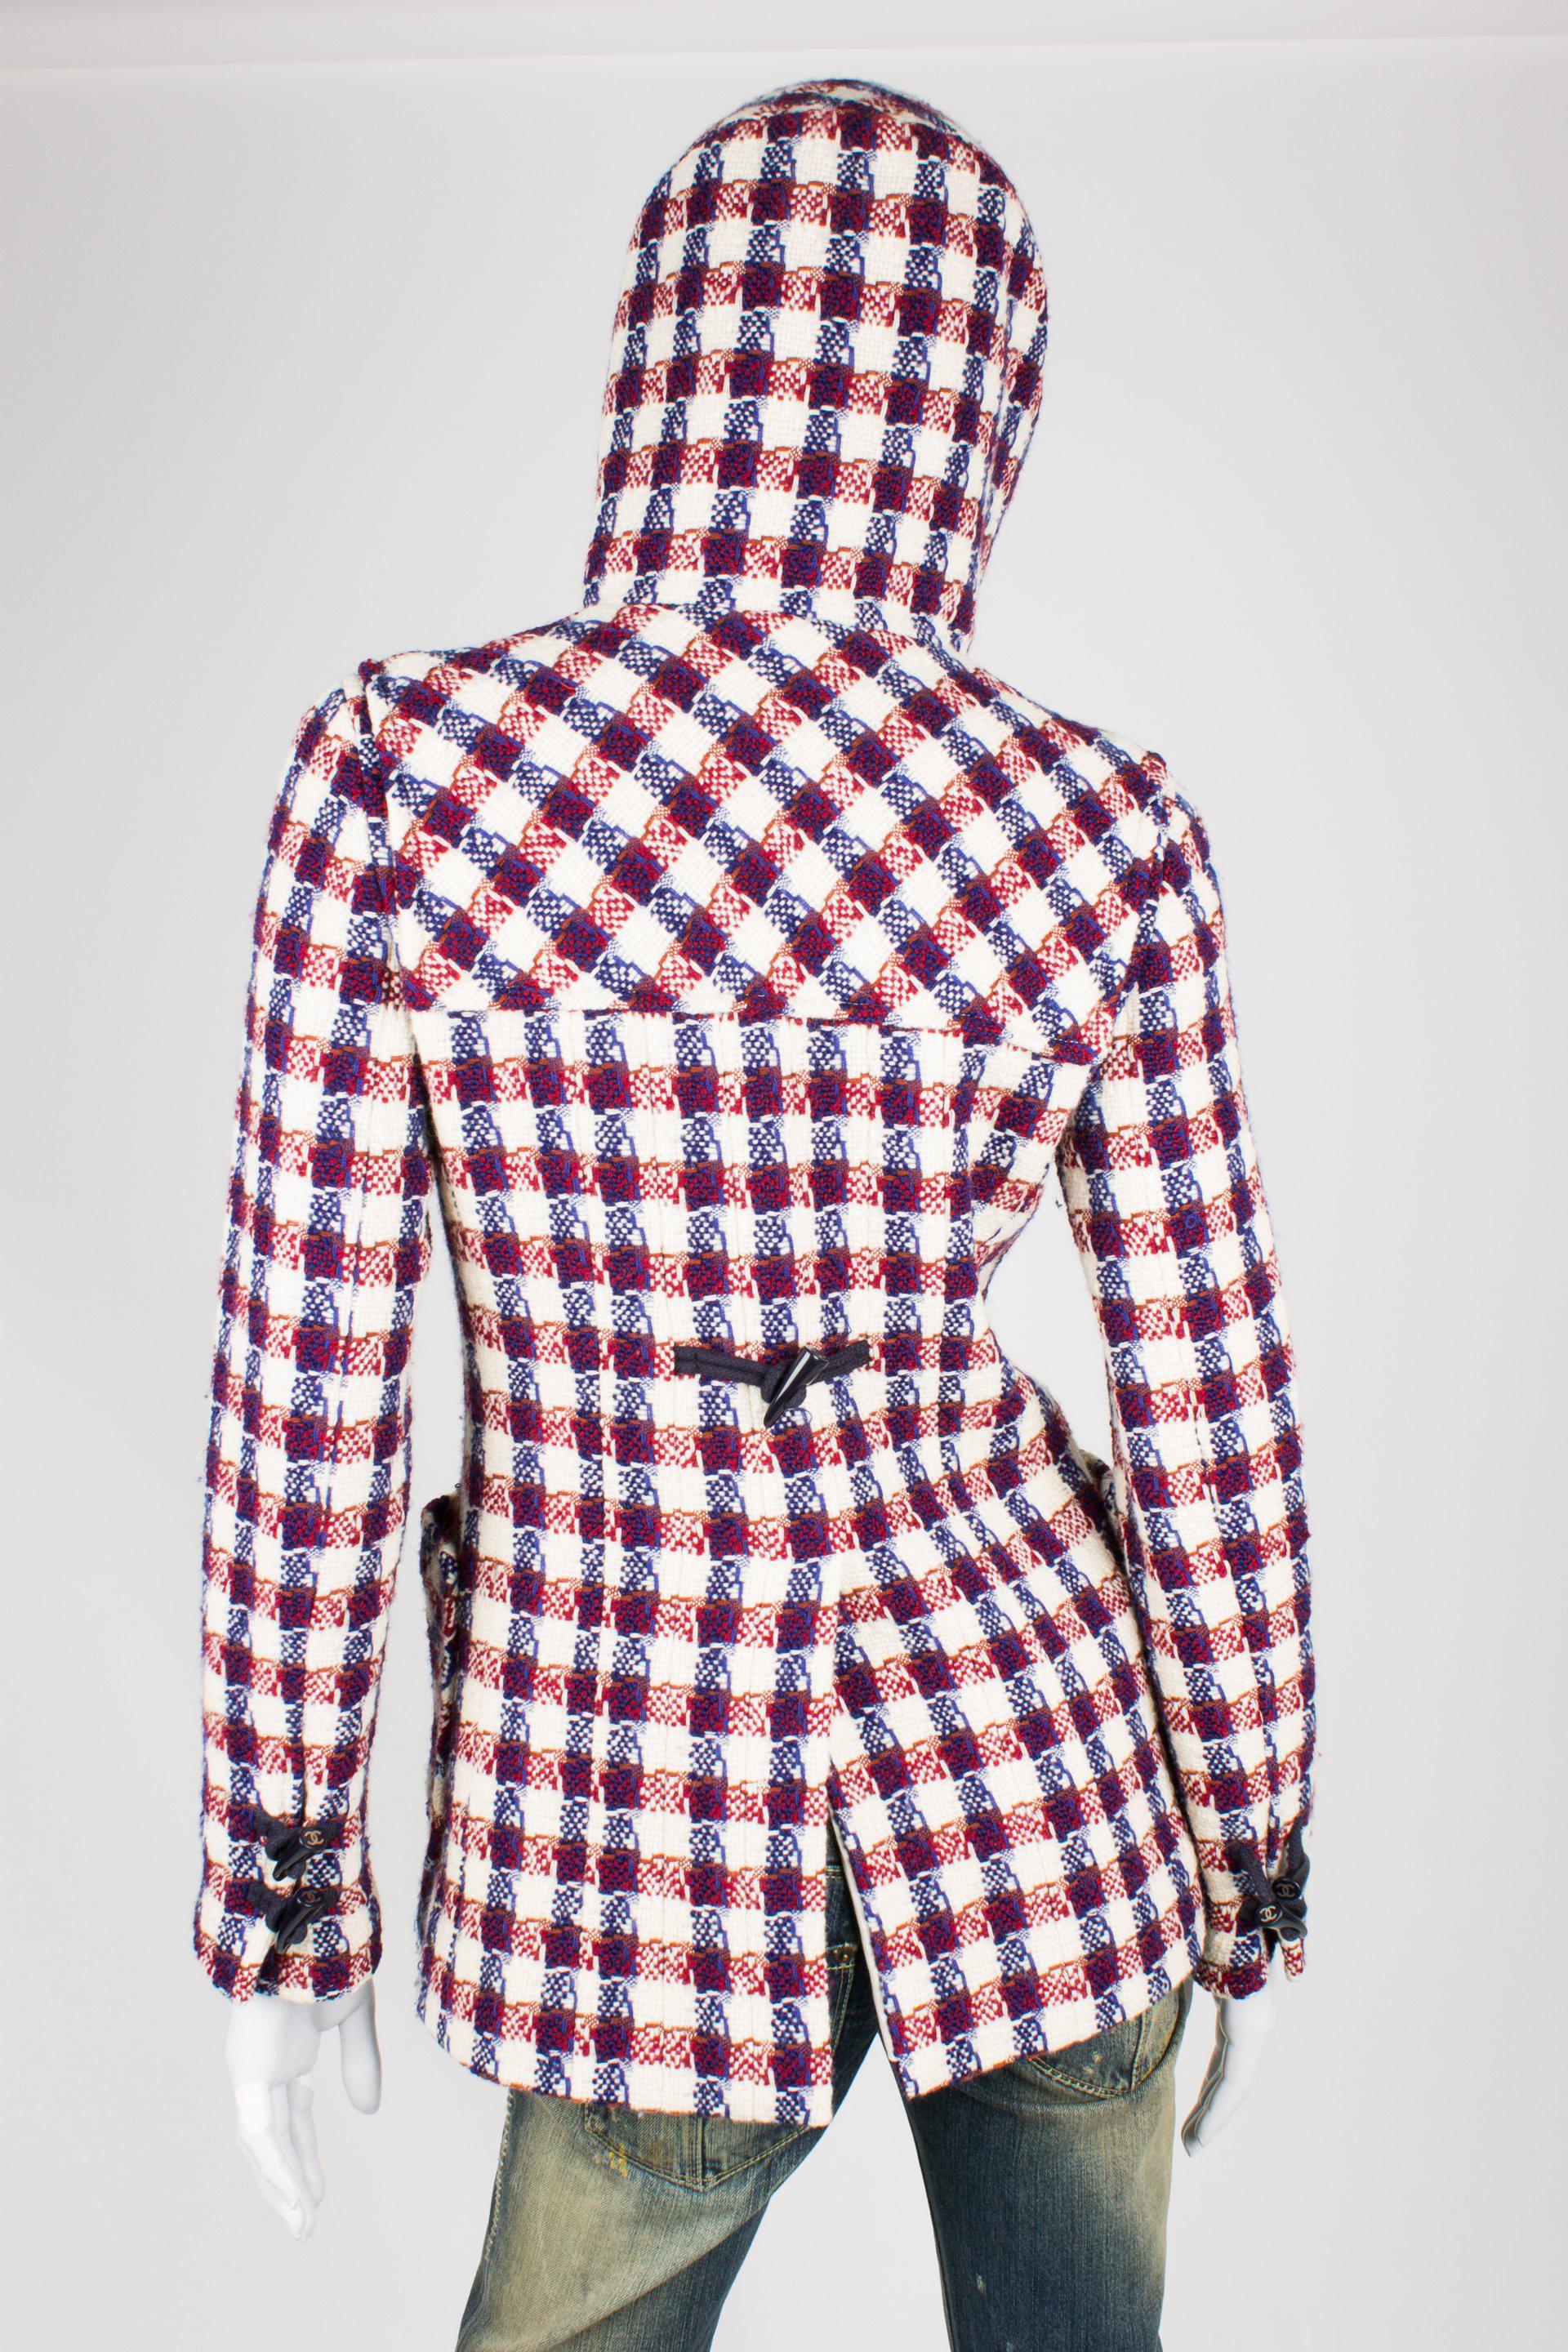 Chanel Checkered Jacket - red/white/blue 1